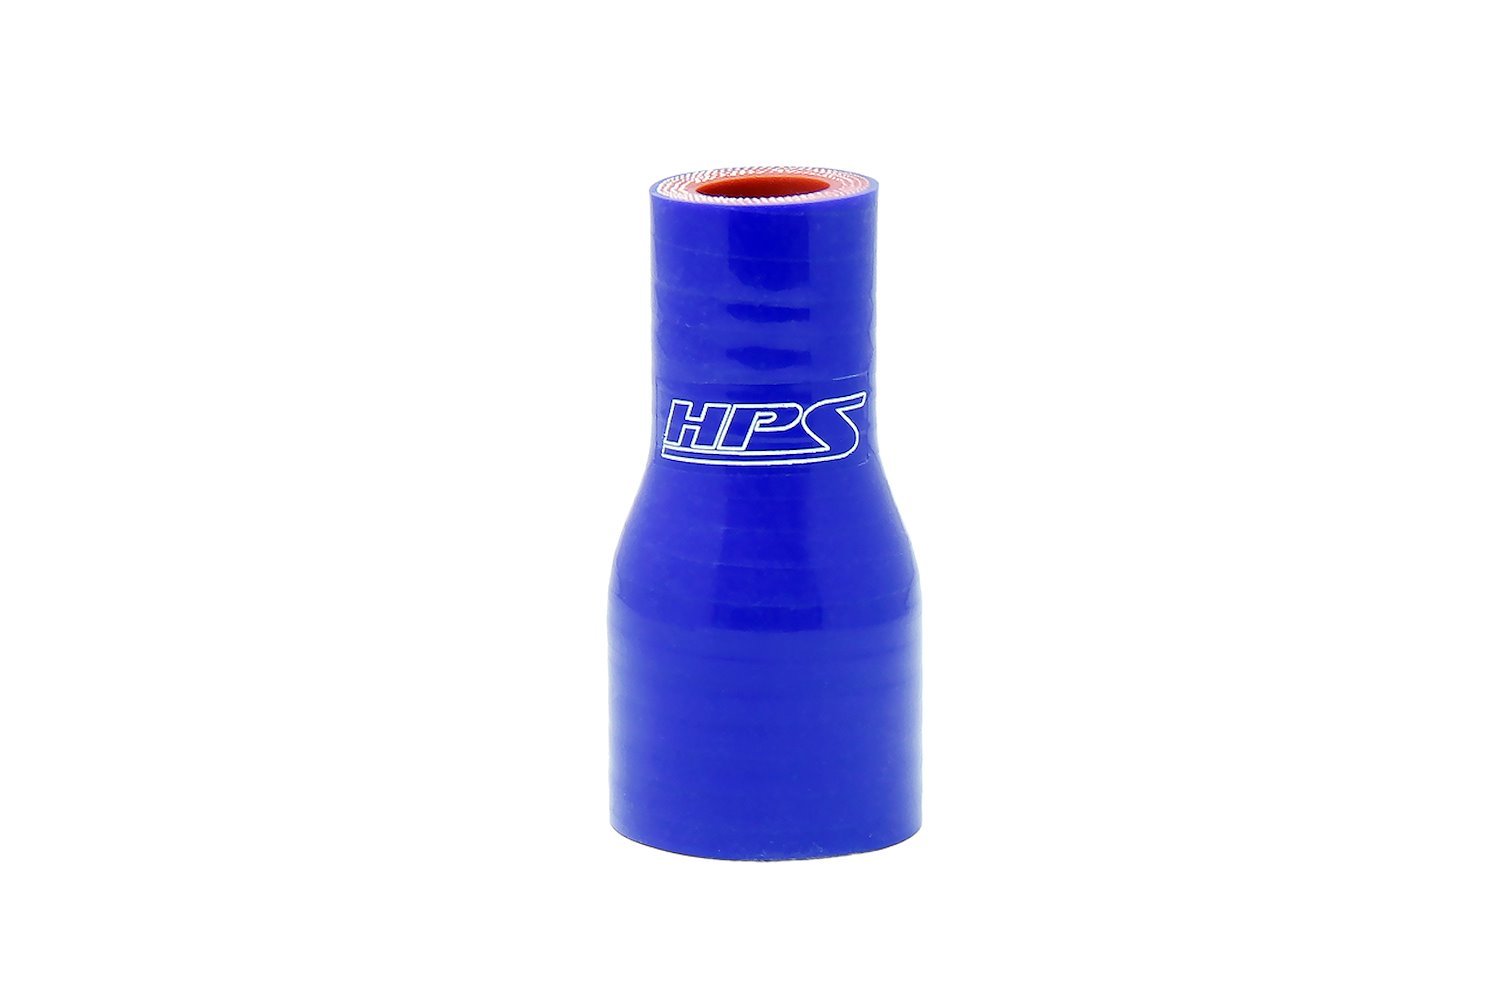 HTSR-050-075-BLUE Silicone Reducer Hose, High-Temp 4-Ply Reinforced, 1/2 in. - 3/4 in. ID, 3 in. Long, Blue